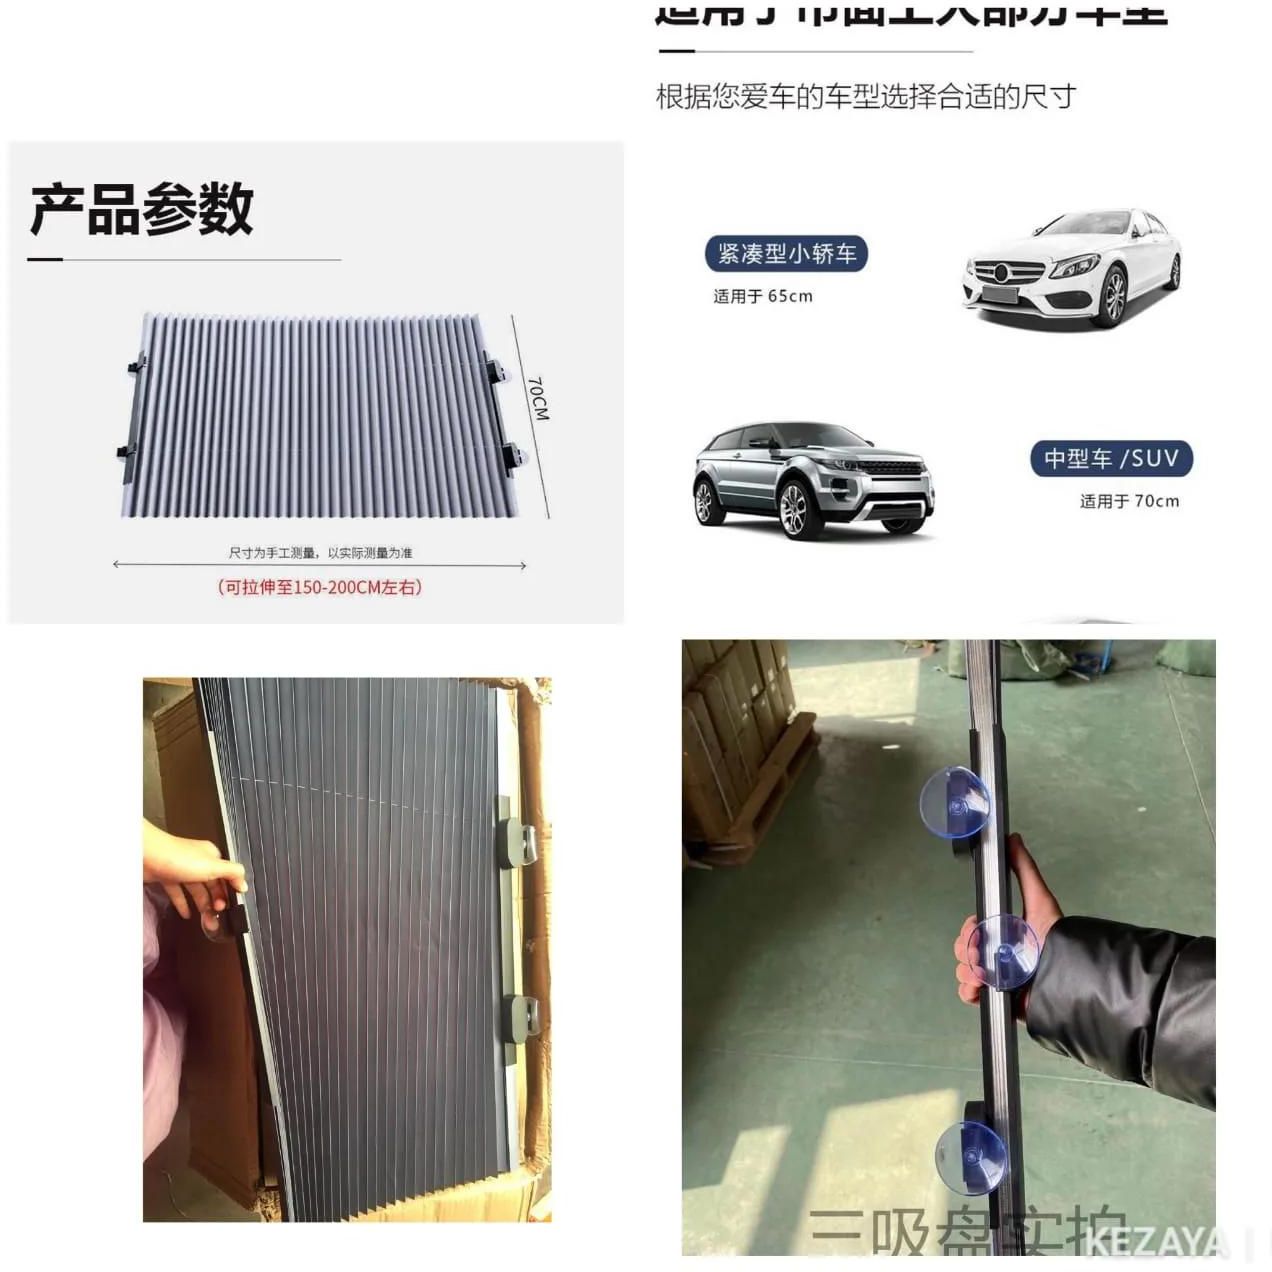 Car retractoshade,his interior Heat Reflective Universal Windscreen/Windshield Car Sun Shade is a great helper for driver in summer.